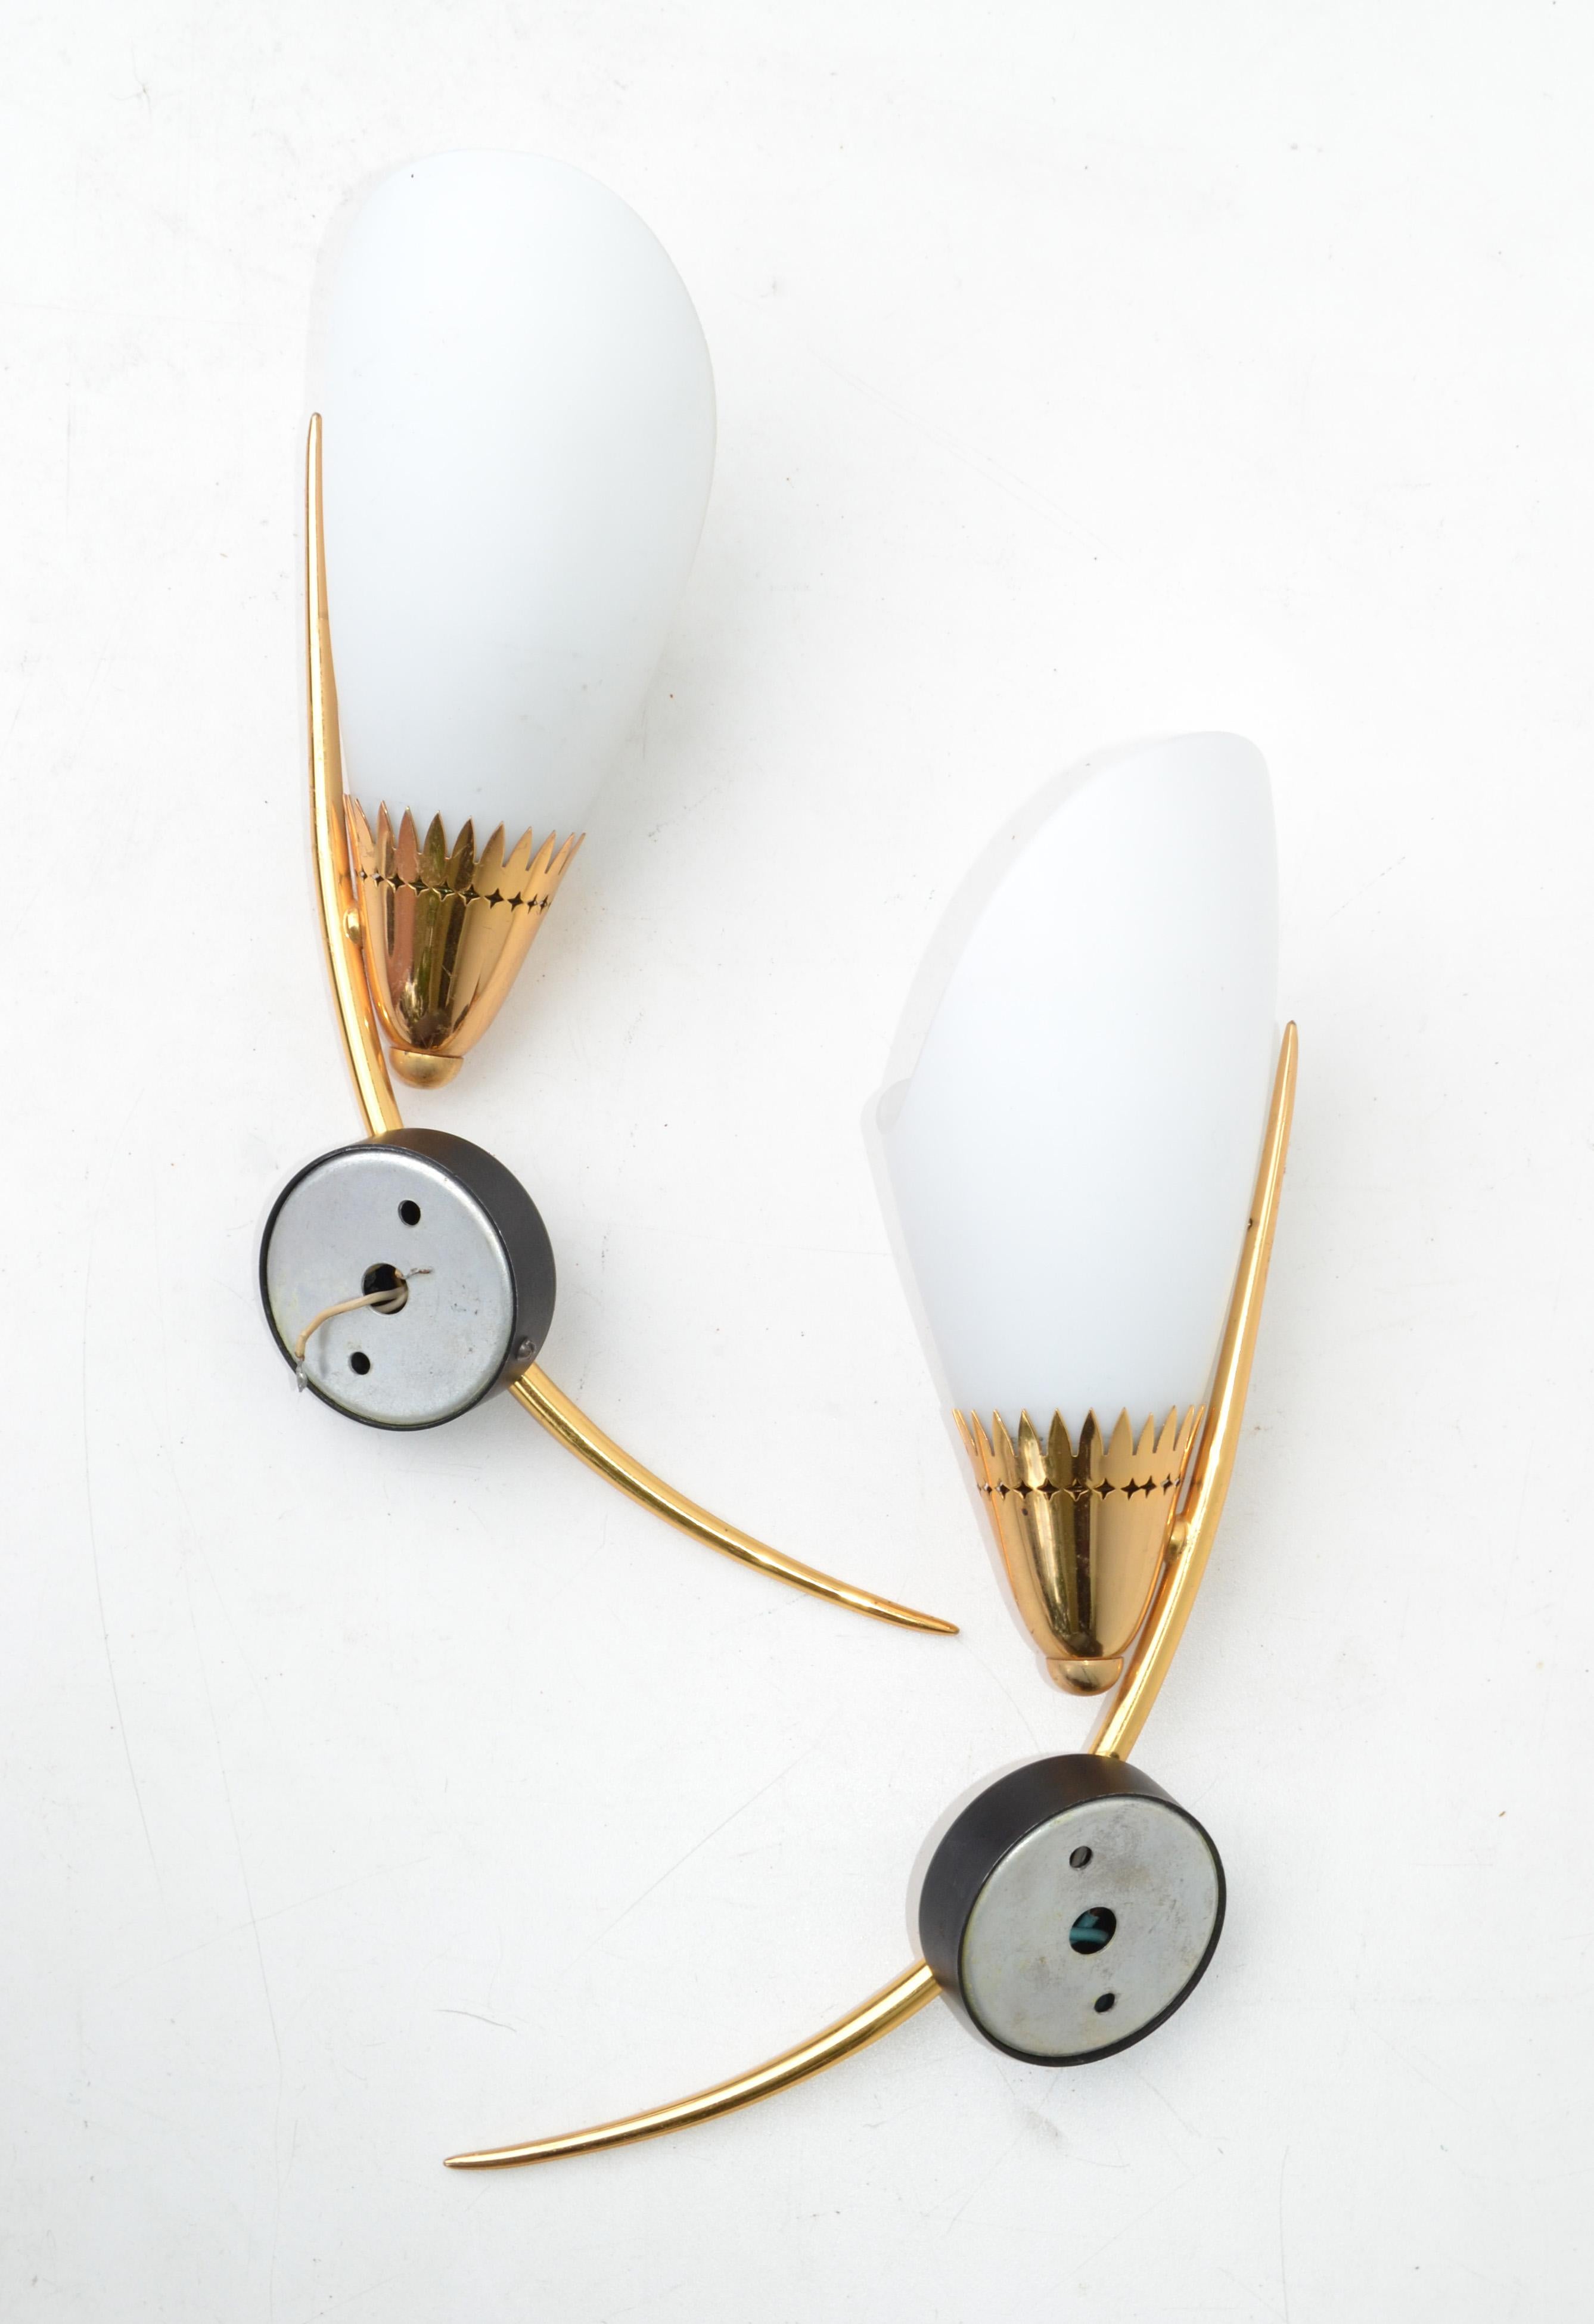 Maison Lunel Mirror Image Sconces Brass Steel & Opaline Shade France 1960, Pair For Sale 4